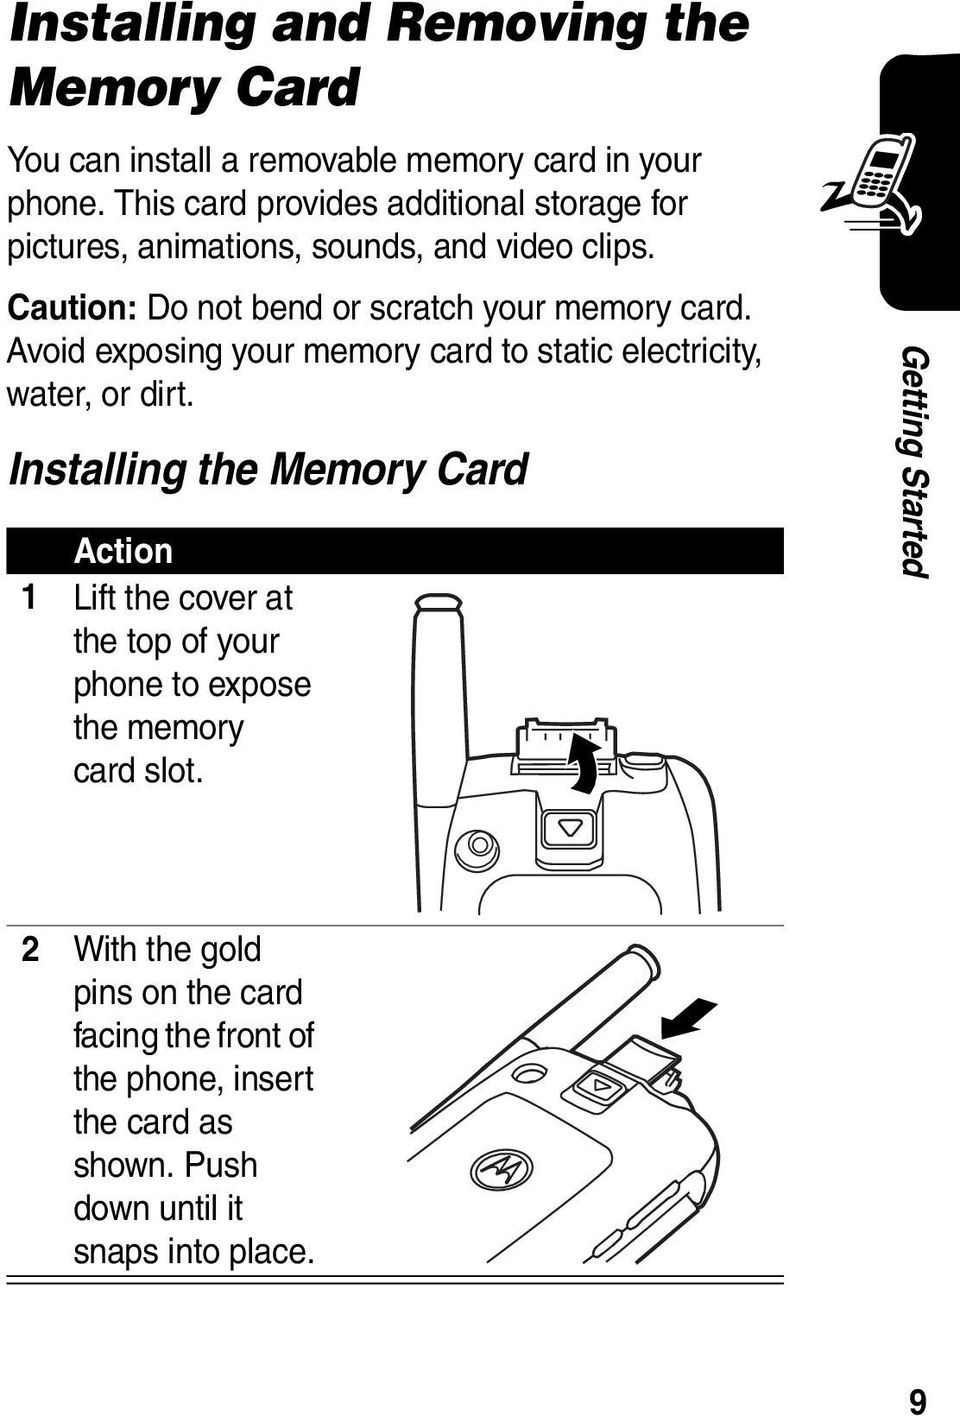 Avoid exposing your memory card to static electricity, water, or dirt.